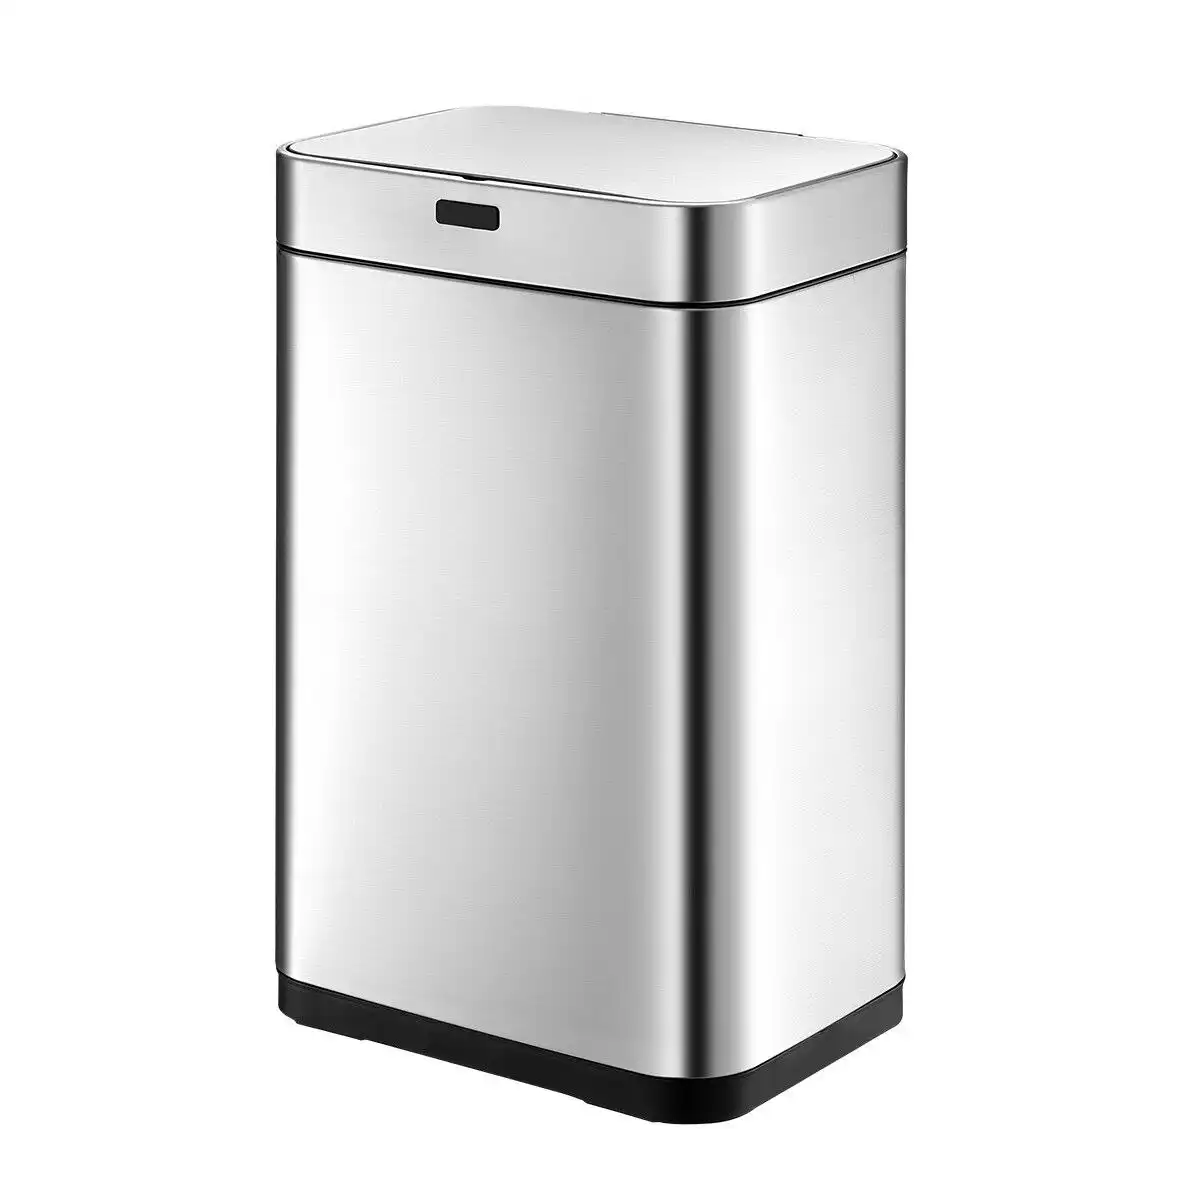 Ausway 75L Dual Rubbish Bin Recycling Kitchen Waste Trash Garbage Can Motion Sensor Stainless Steel Silver